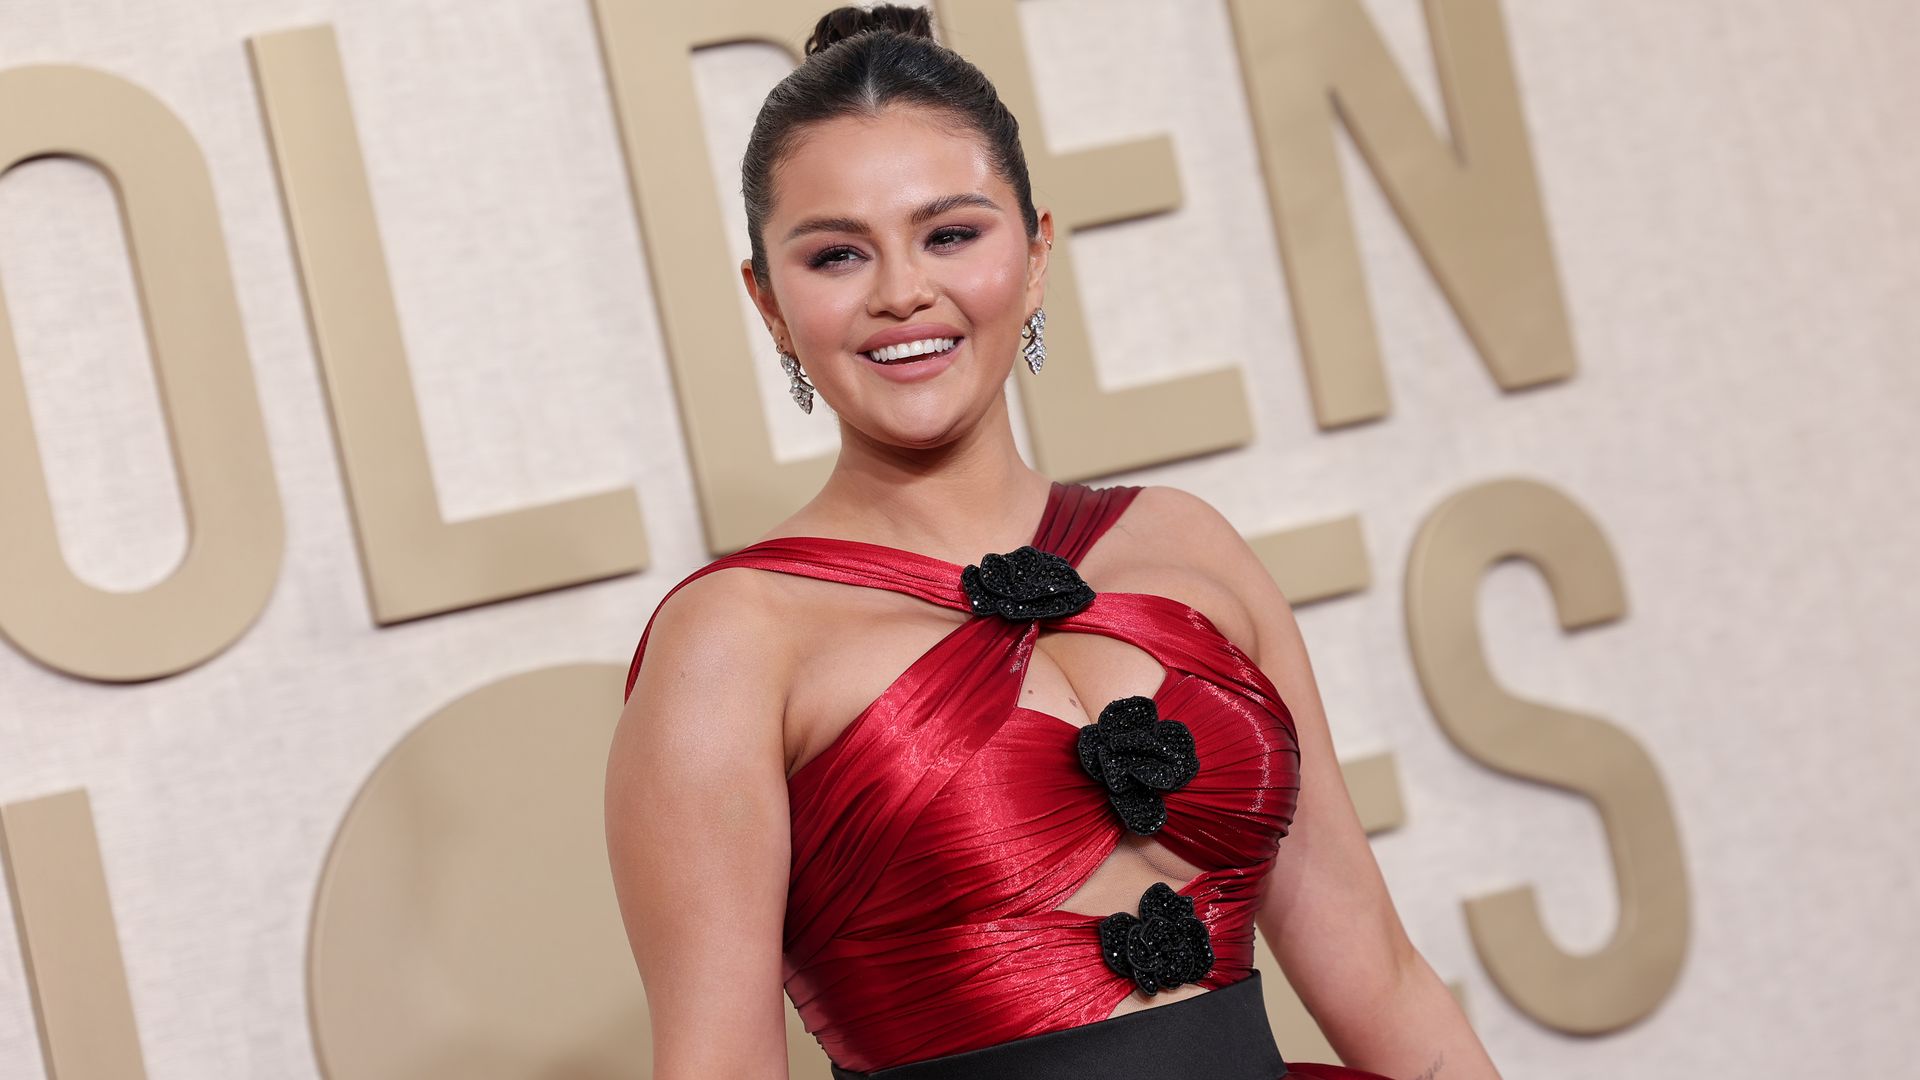 Selena Gomez has Marilyn Monroe moment as she graces the Golden Globes in red hot gown